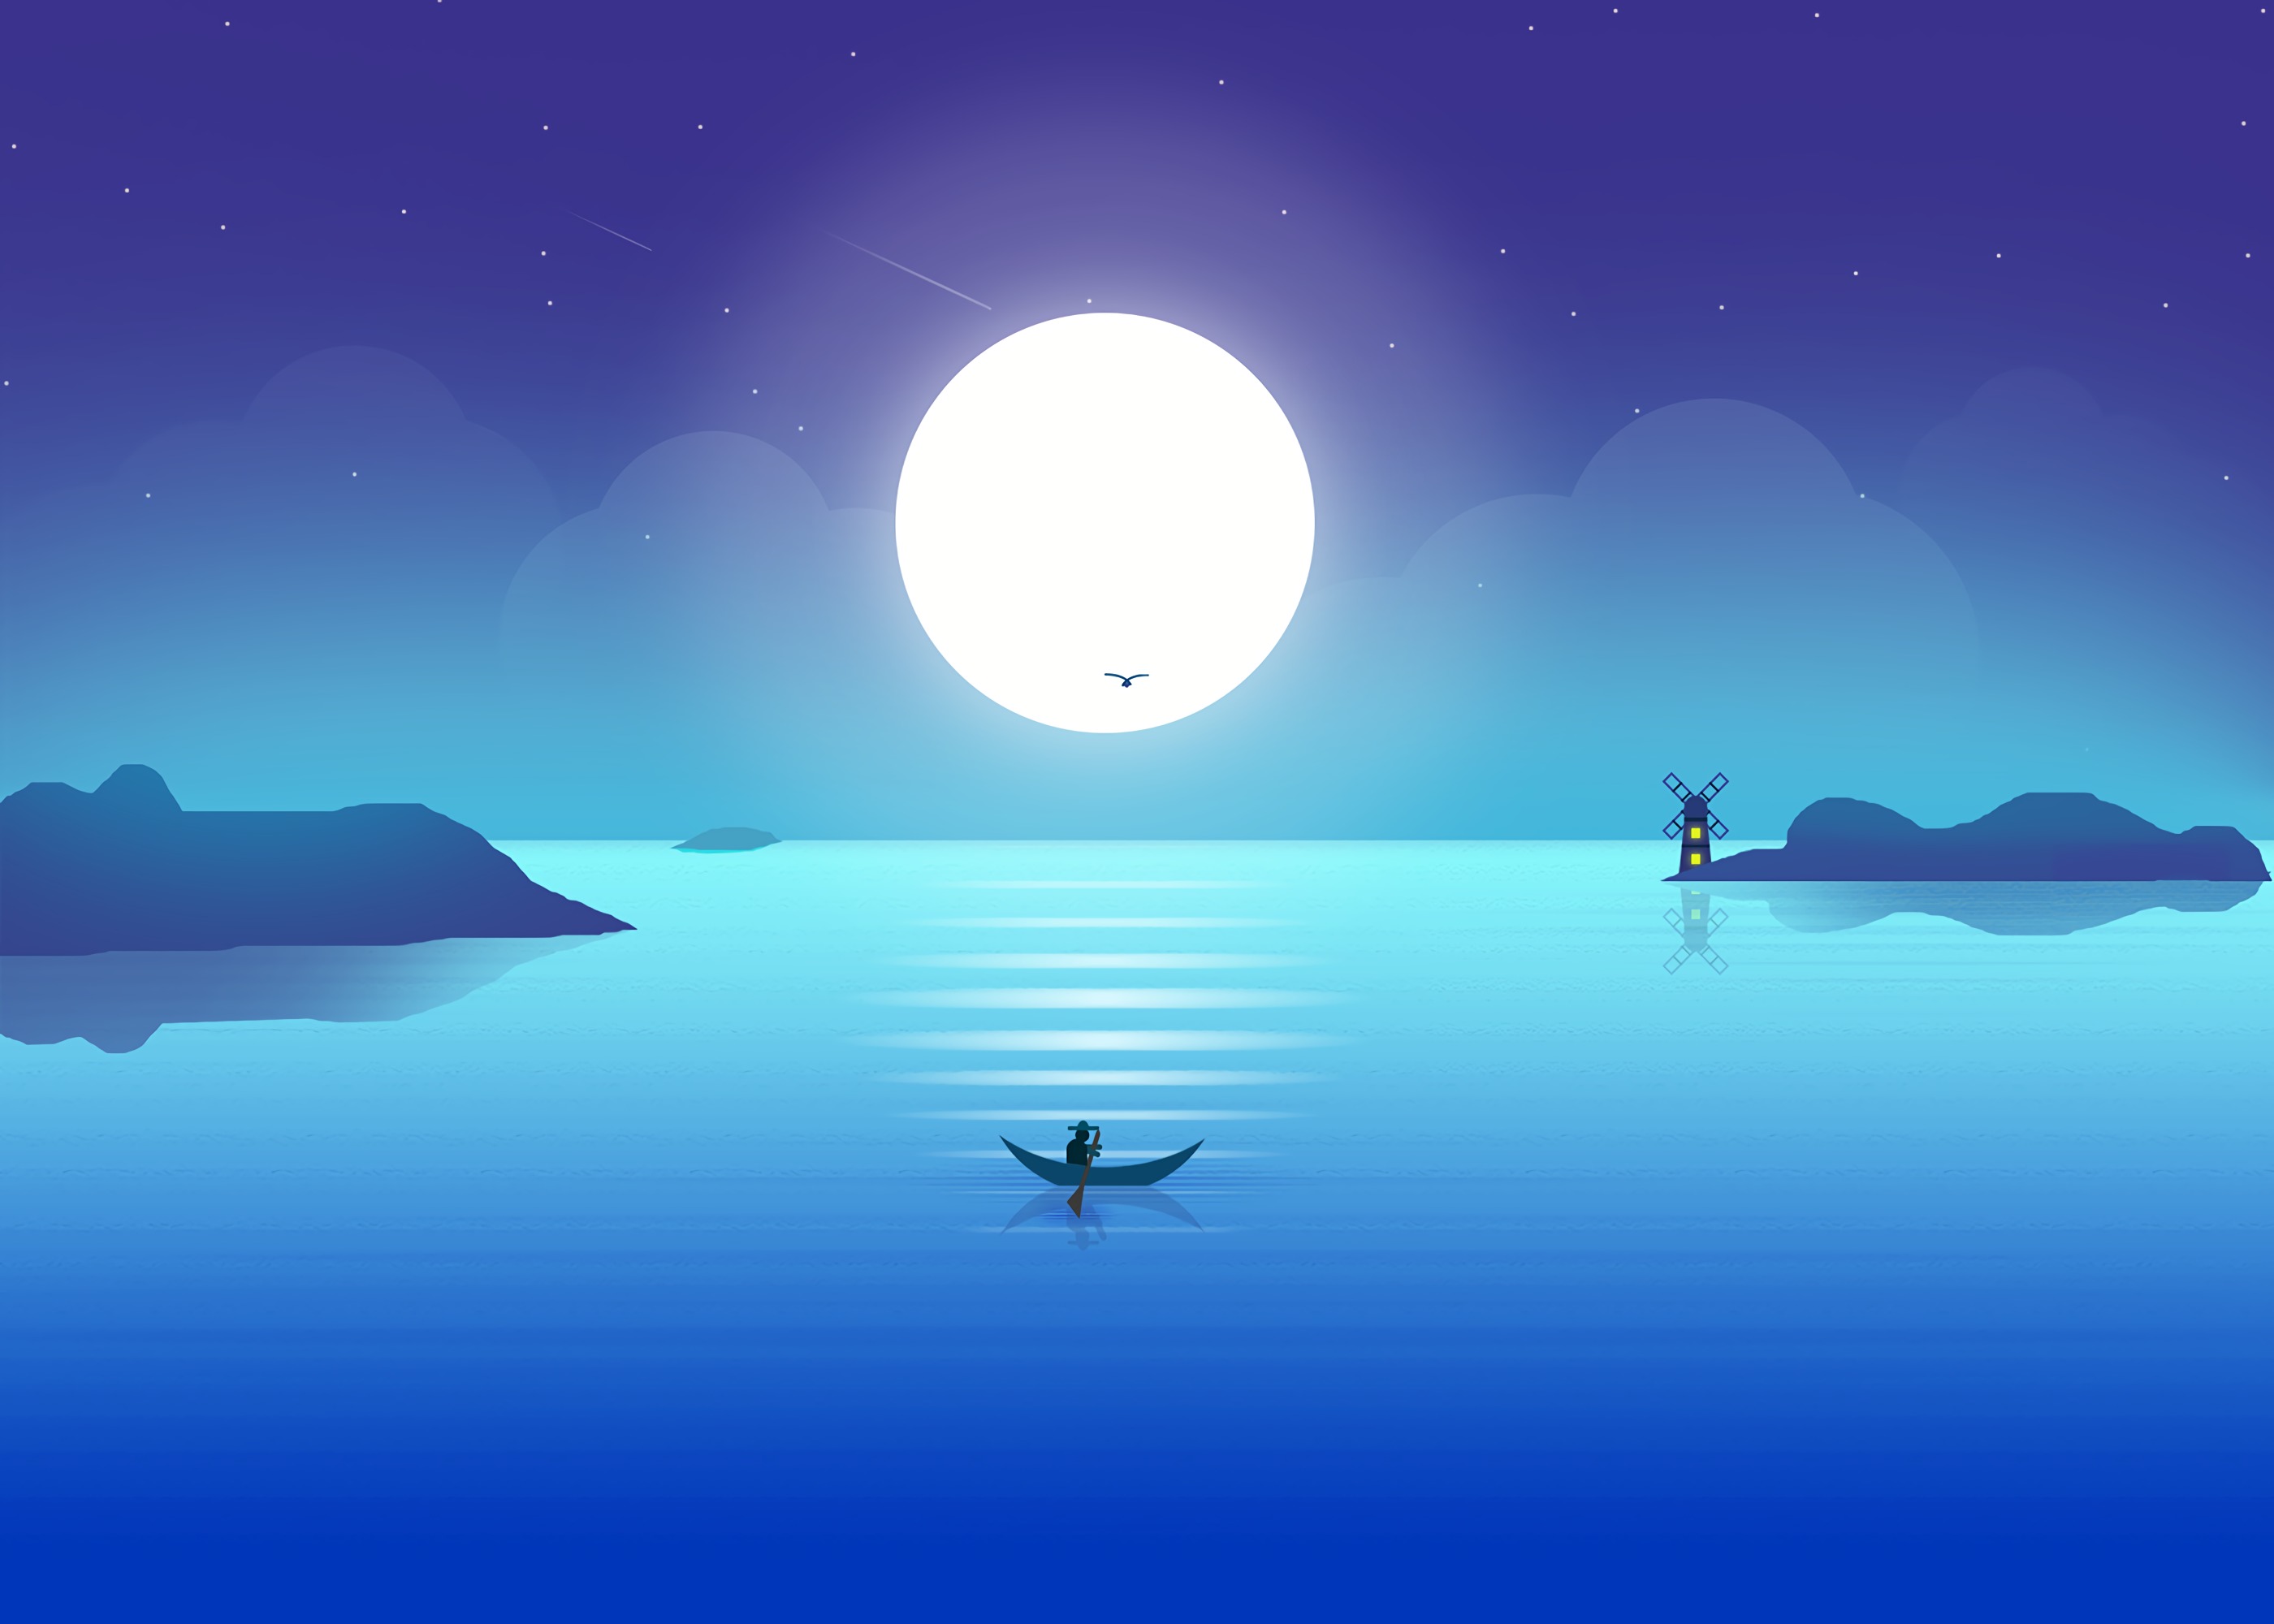 134035 download wallpaper horizon, art, moon, boat, fisherman screensavers and pictures for free